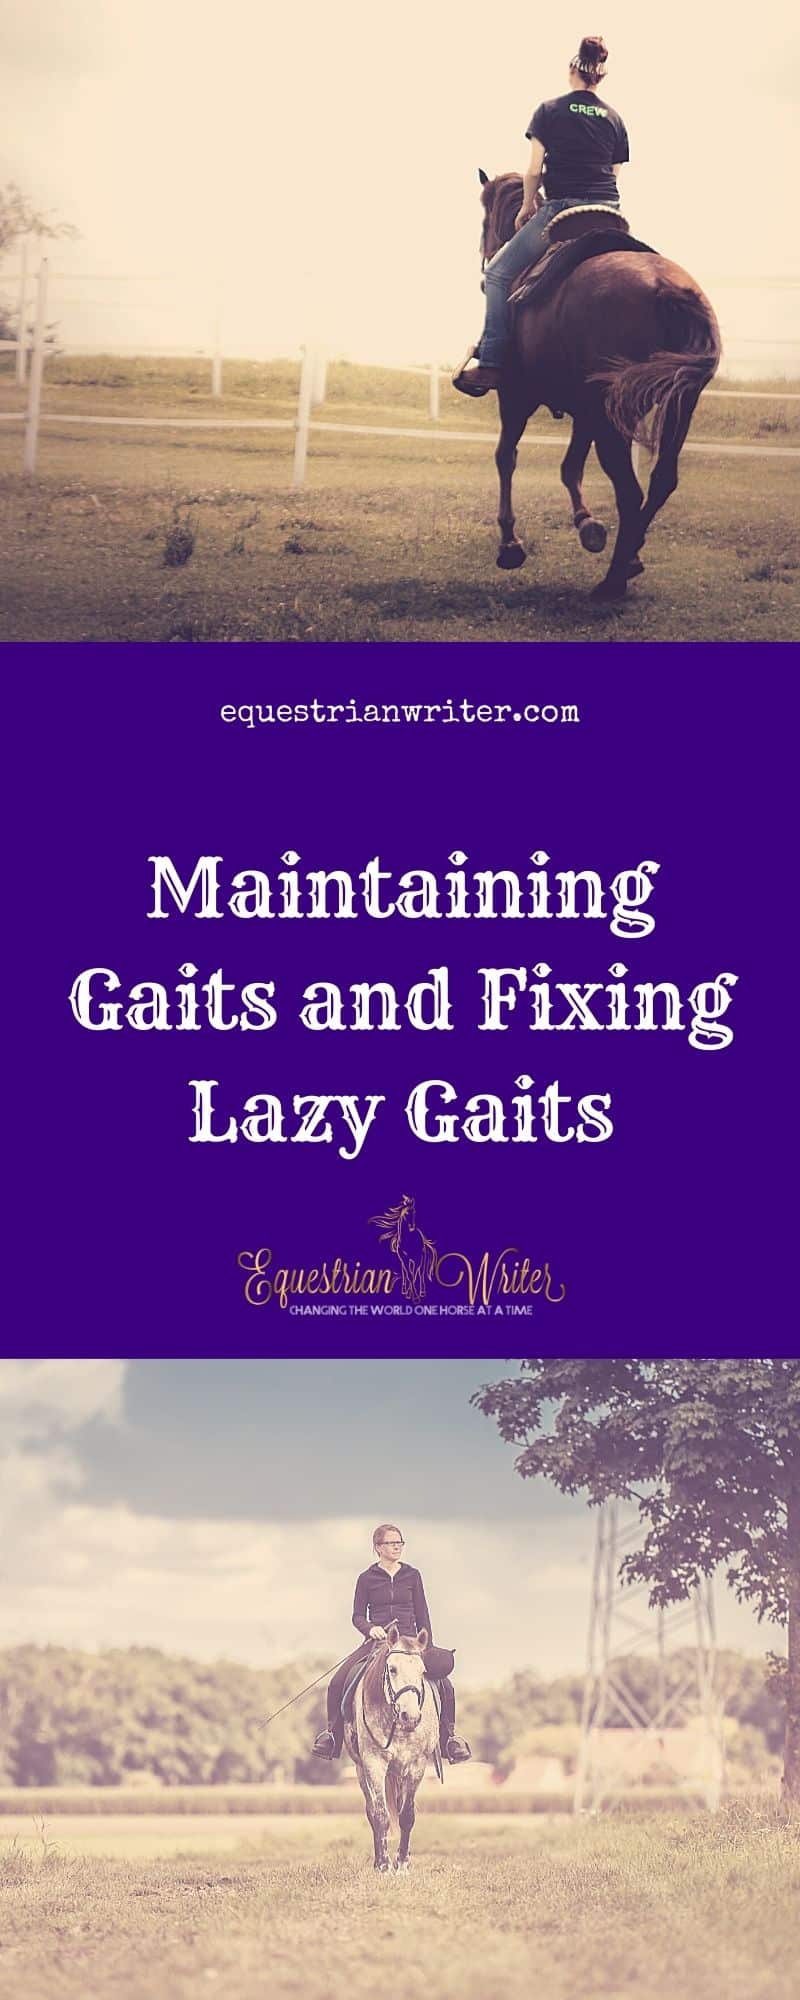 Maintaining Gaits and Fixing Lazy Gaits